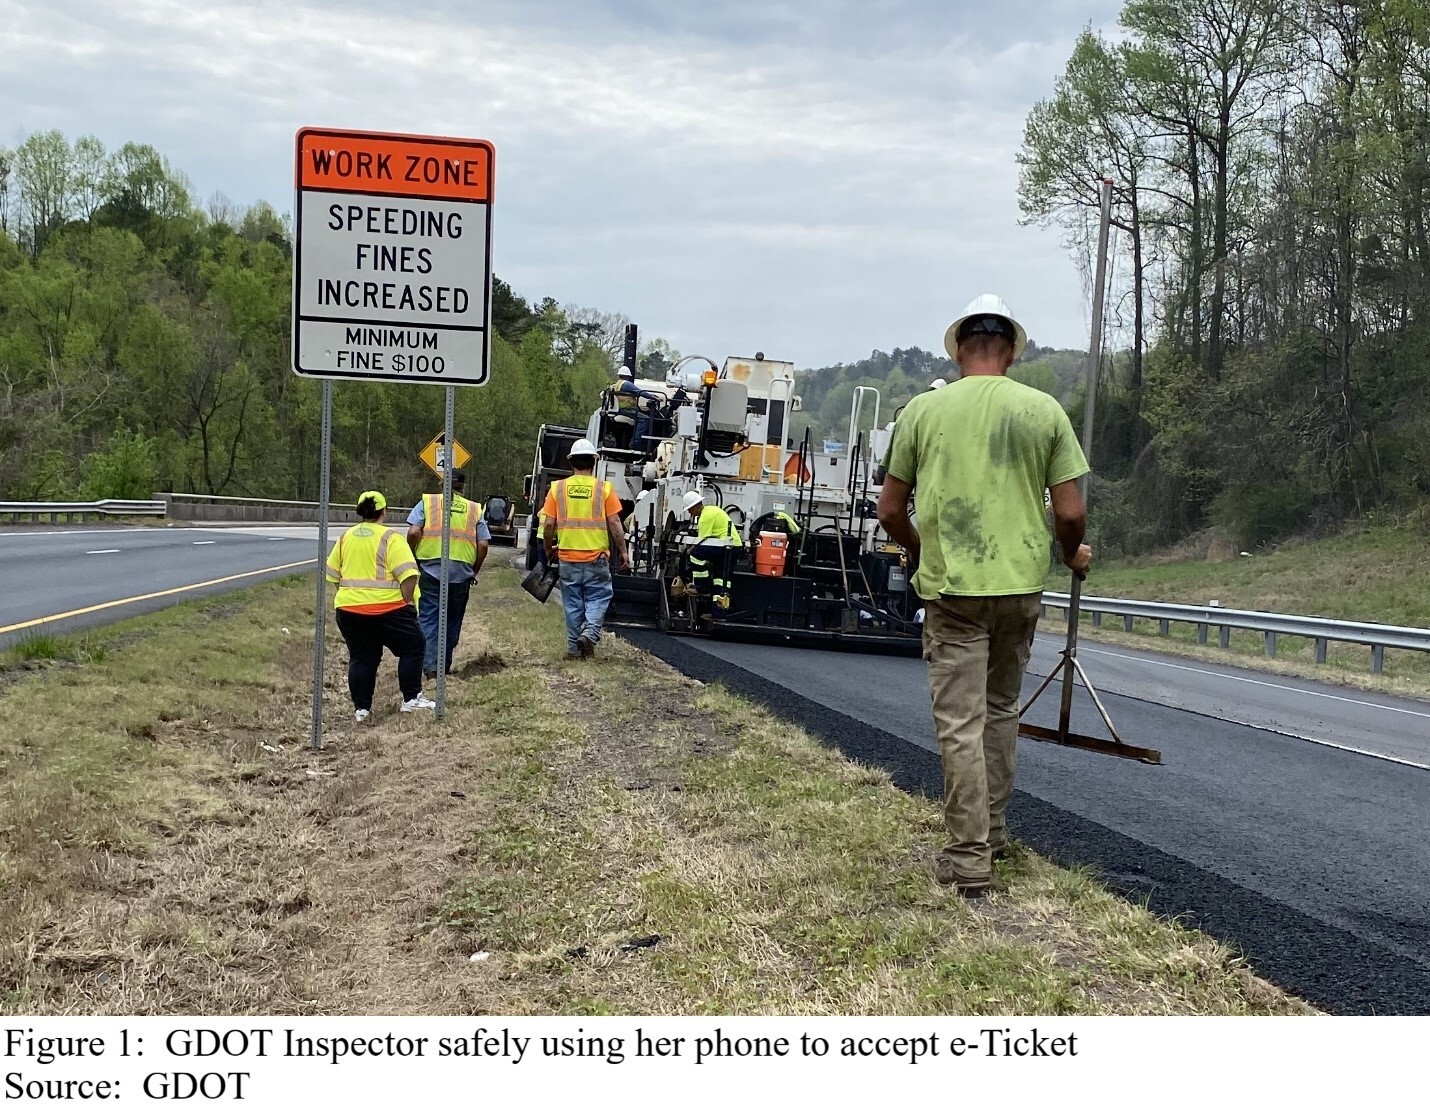 GDOT lead safely using phone to create eTicket